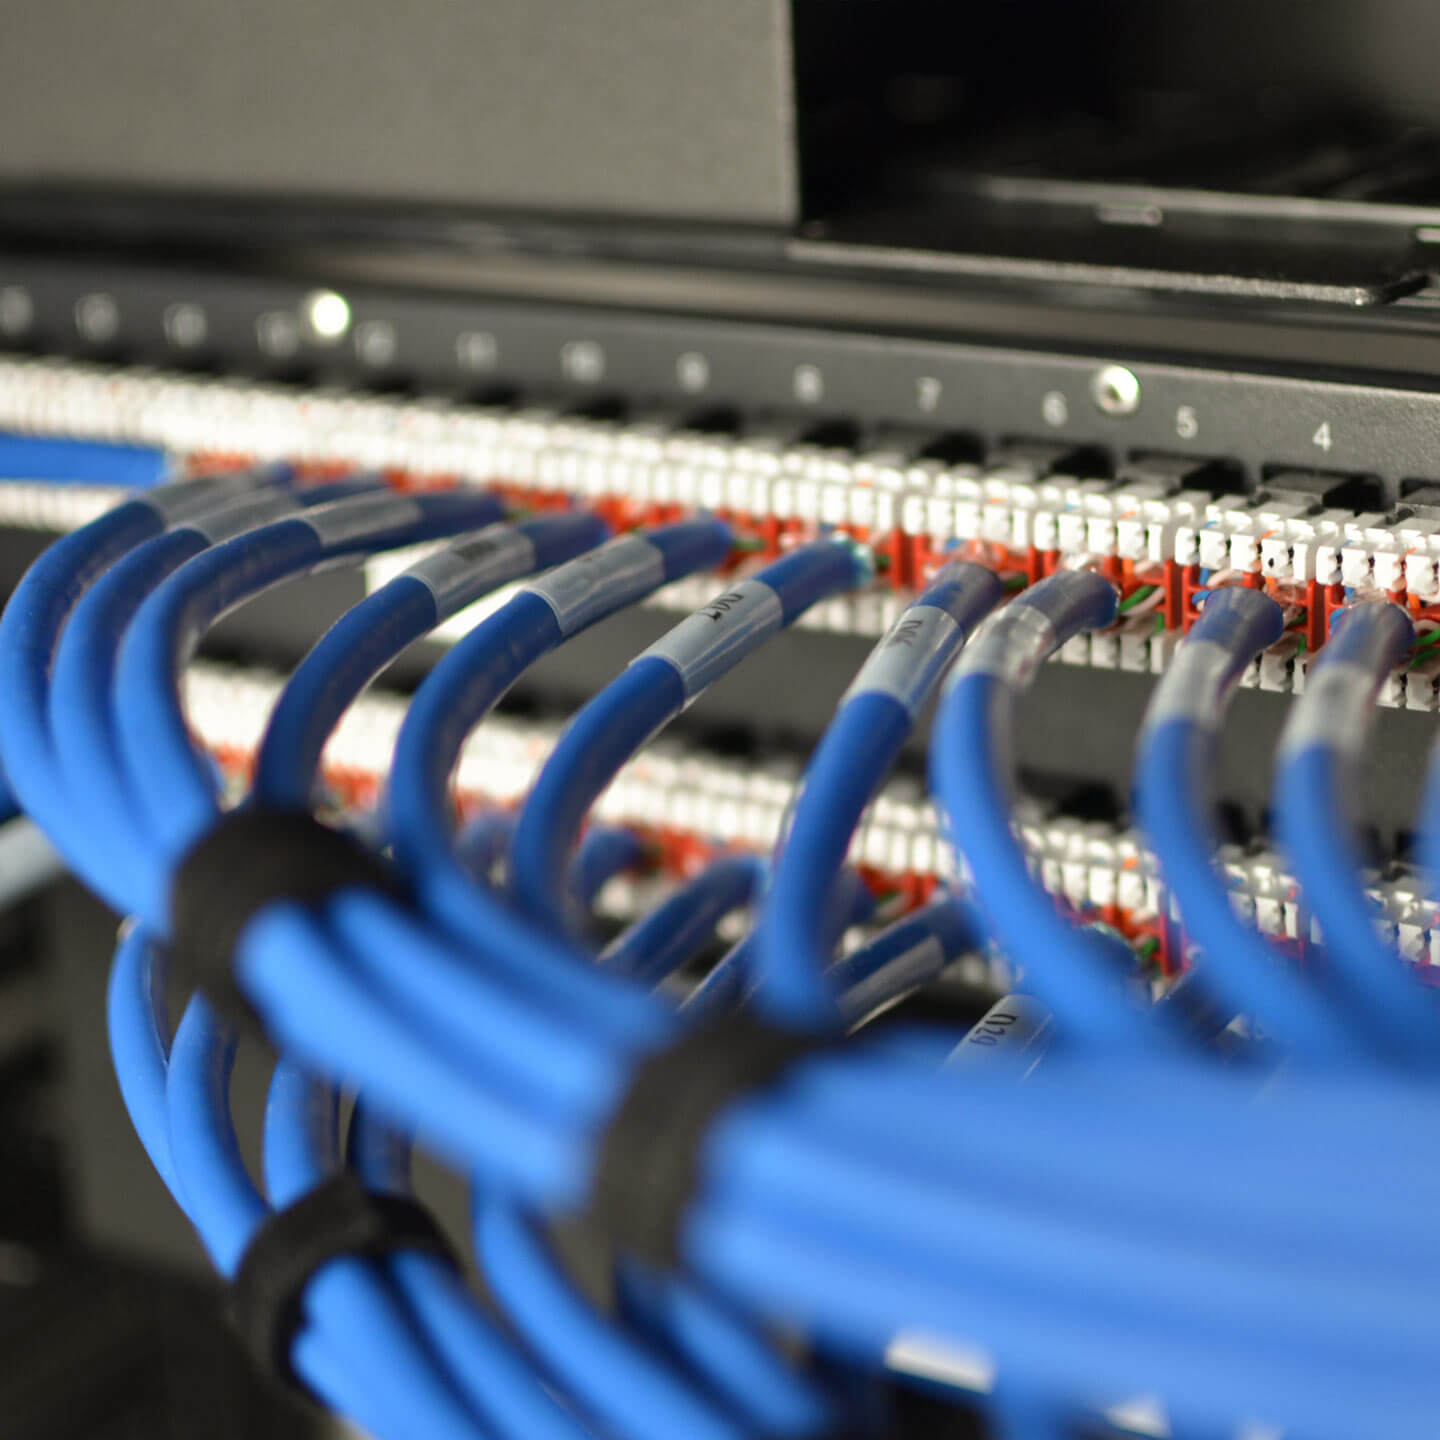 Patch Panel cables